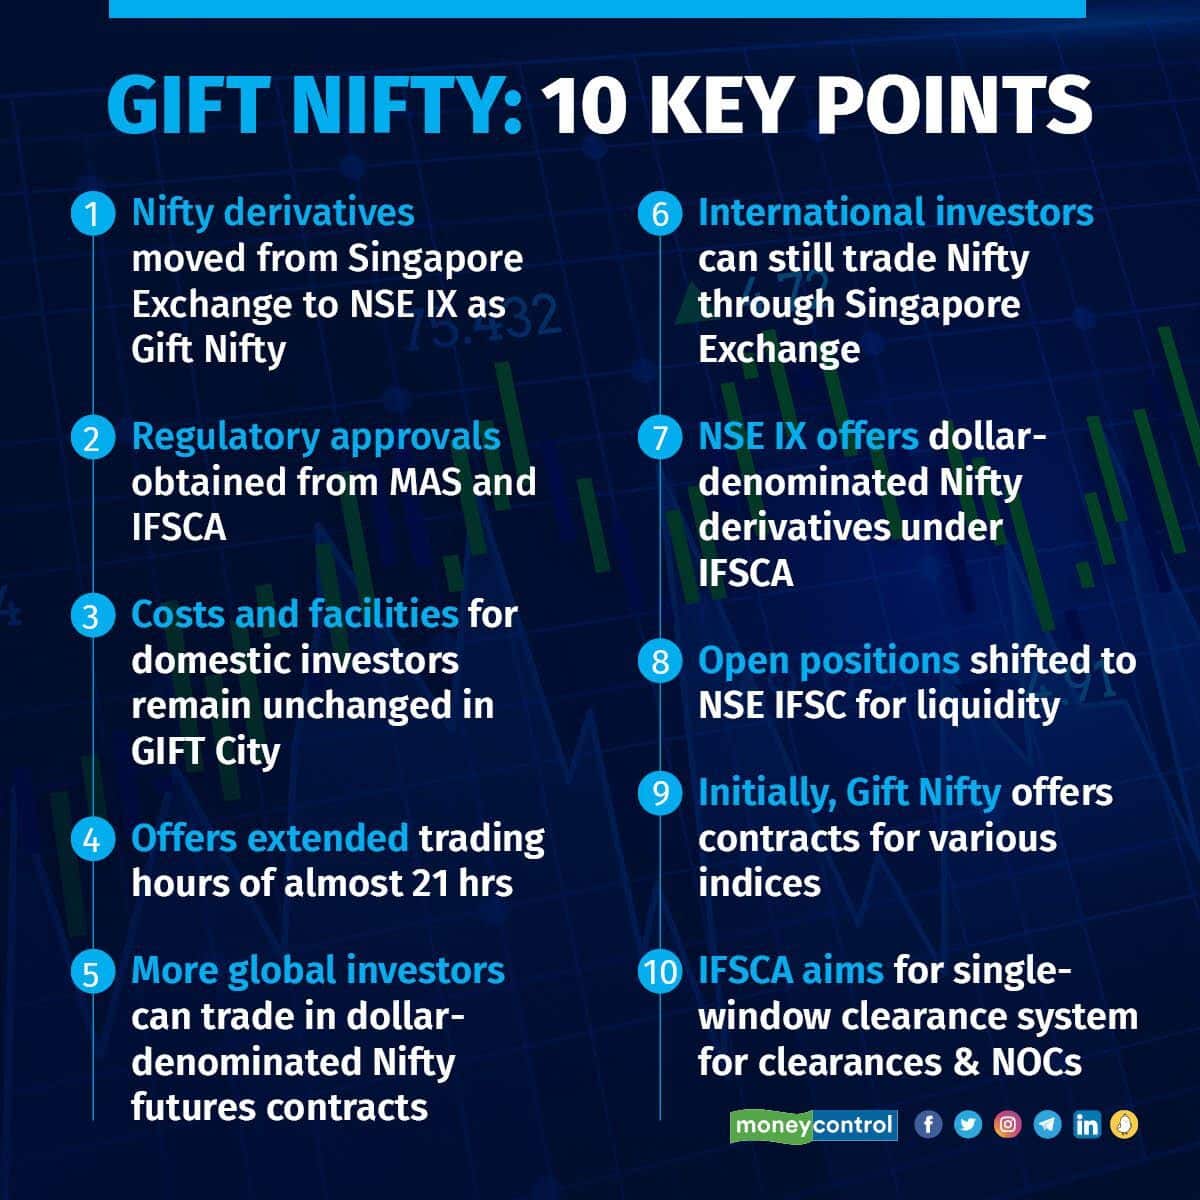 GIFT Nifty records alltime high single day turnover of 12 billion